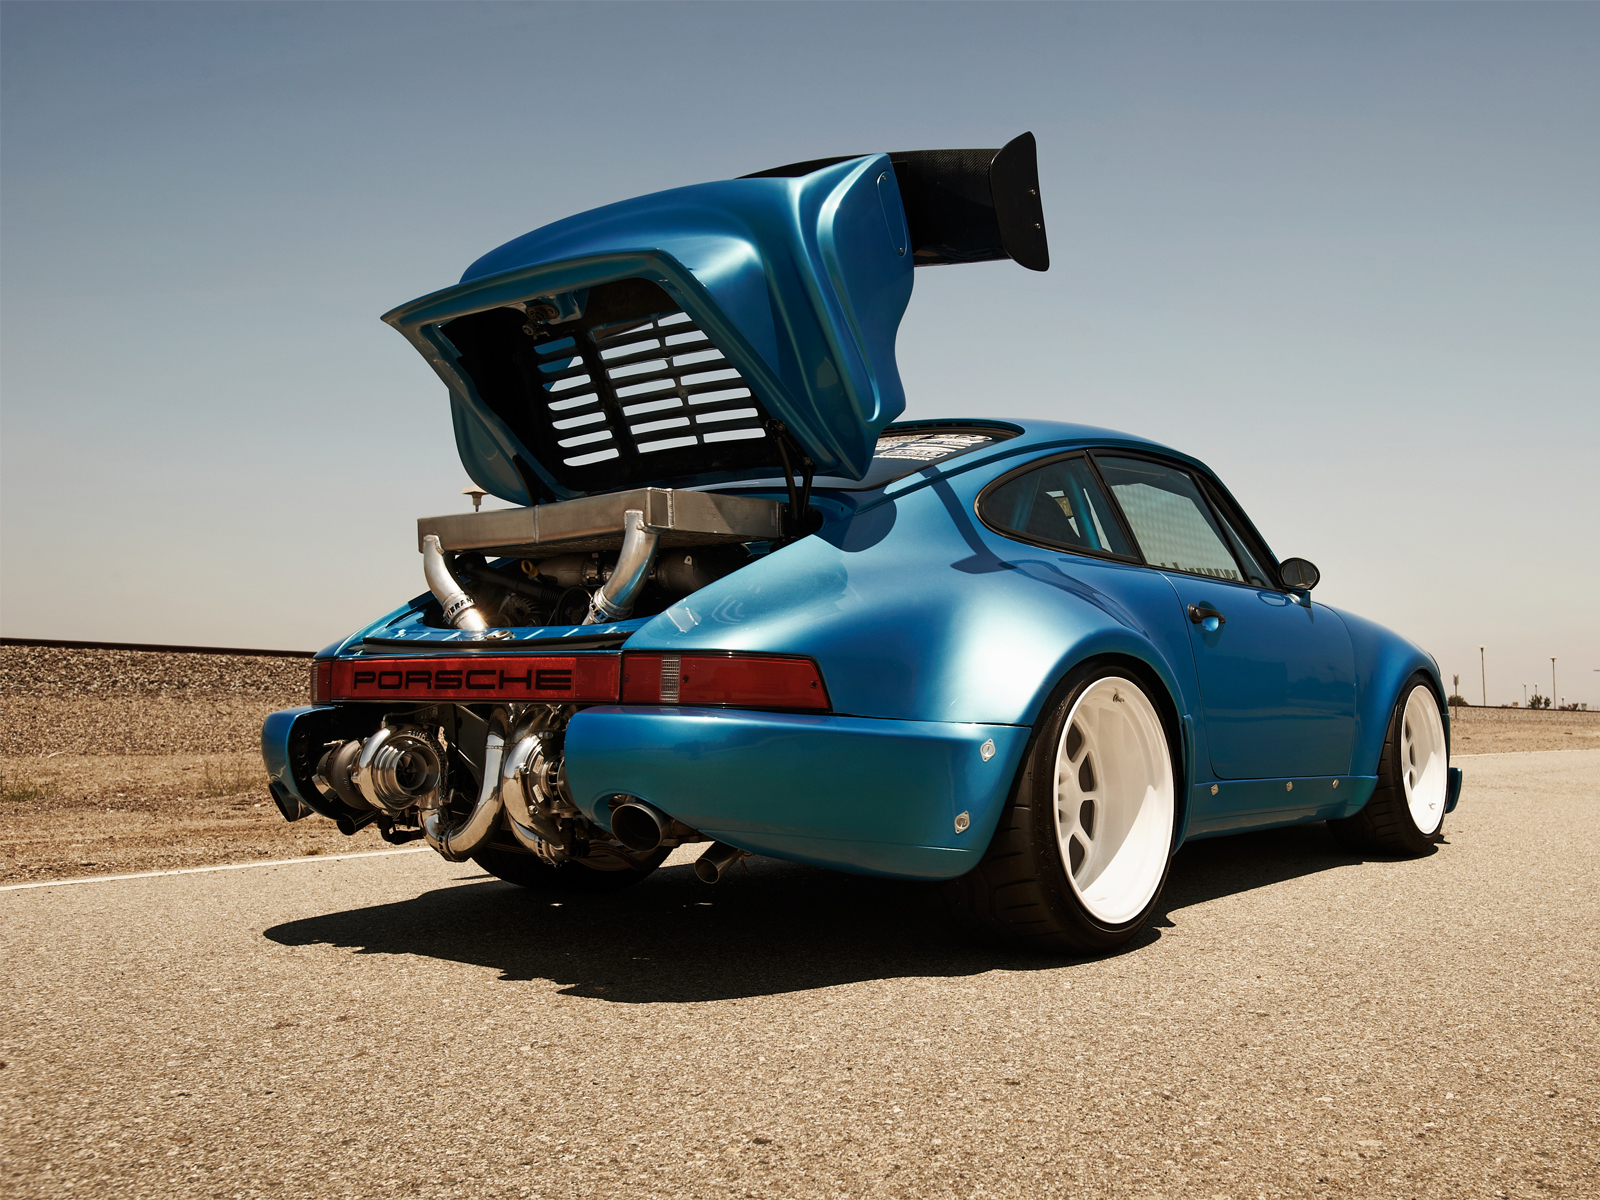 2012, Porsche, 911, Twin, Turbo, Coupe, Supercar, Supercars, Tuning, Engine, Engines Wallpaper